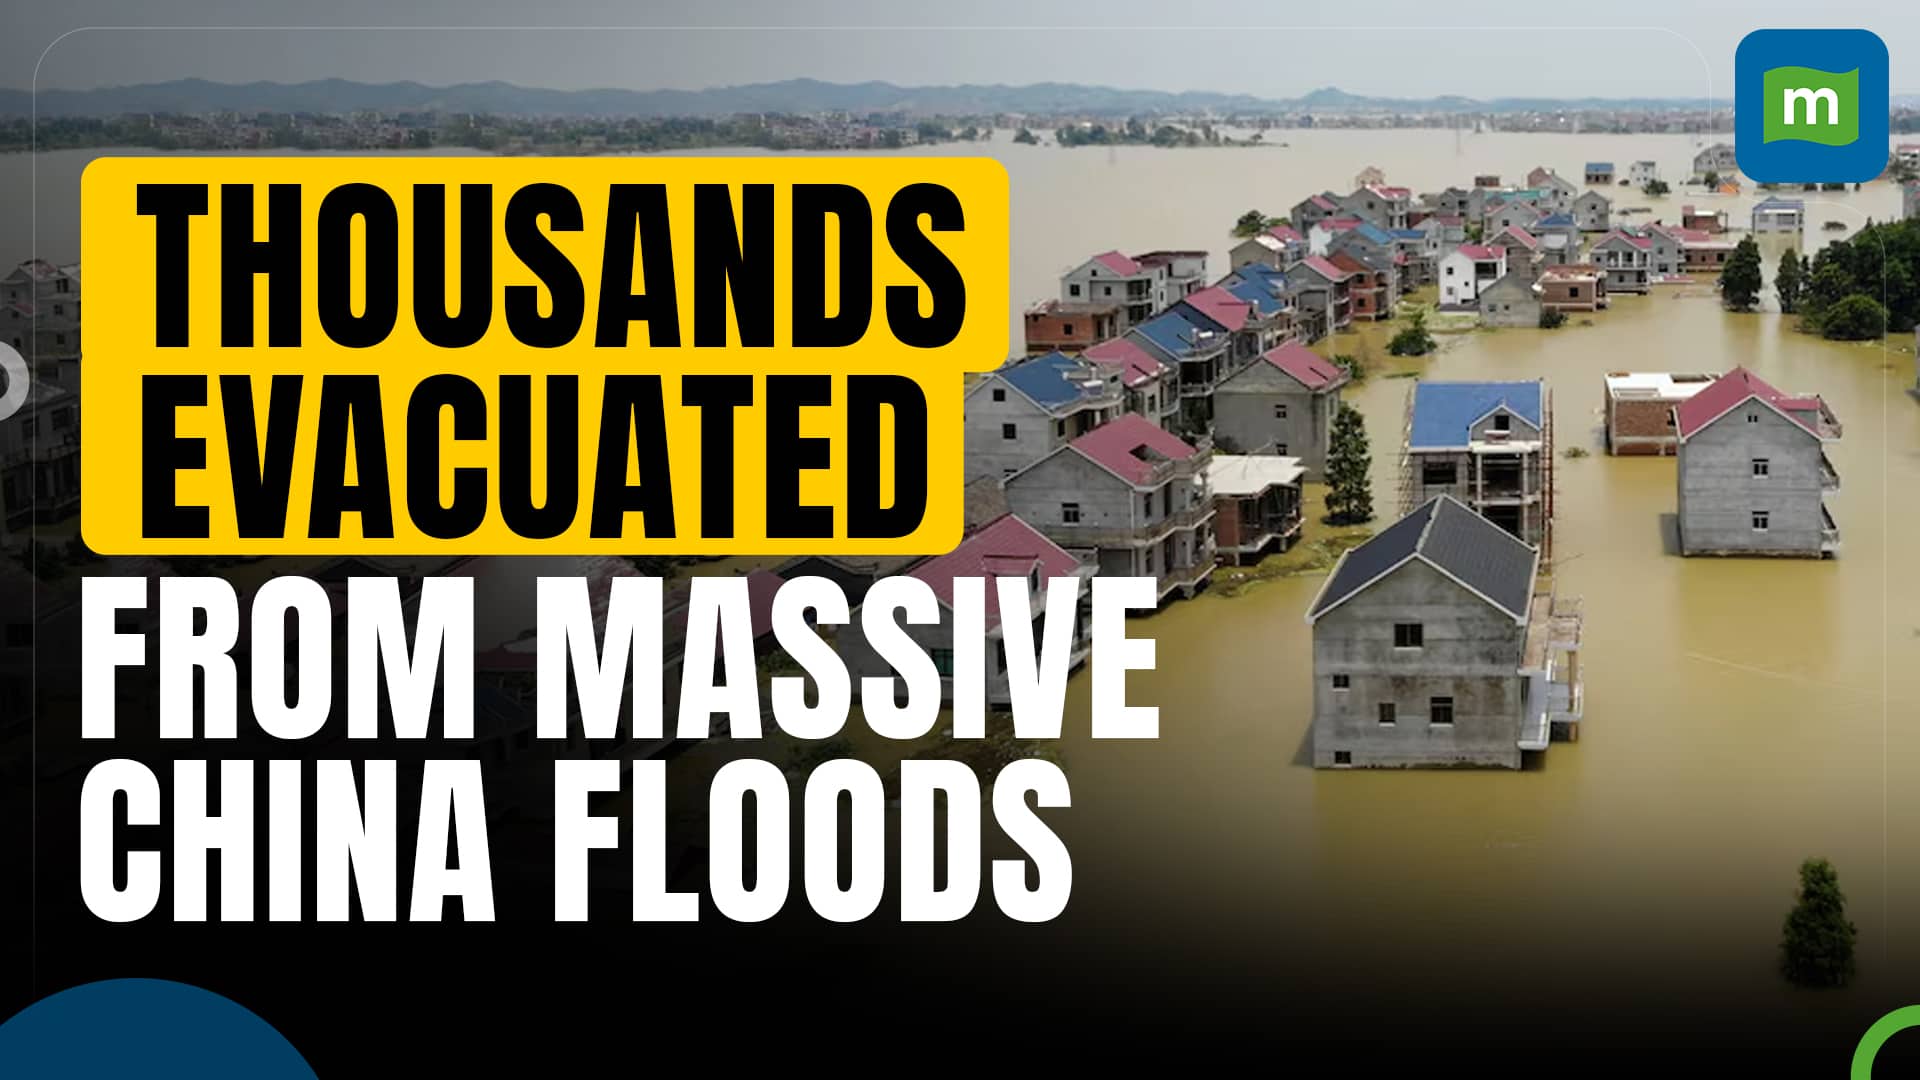 Historic floods strike China's Guangdong province | Posing risk to millions | World news